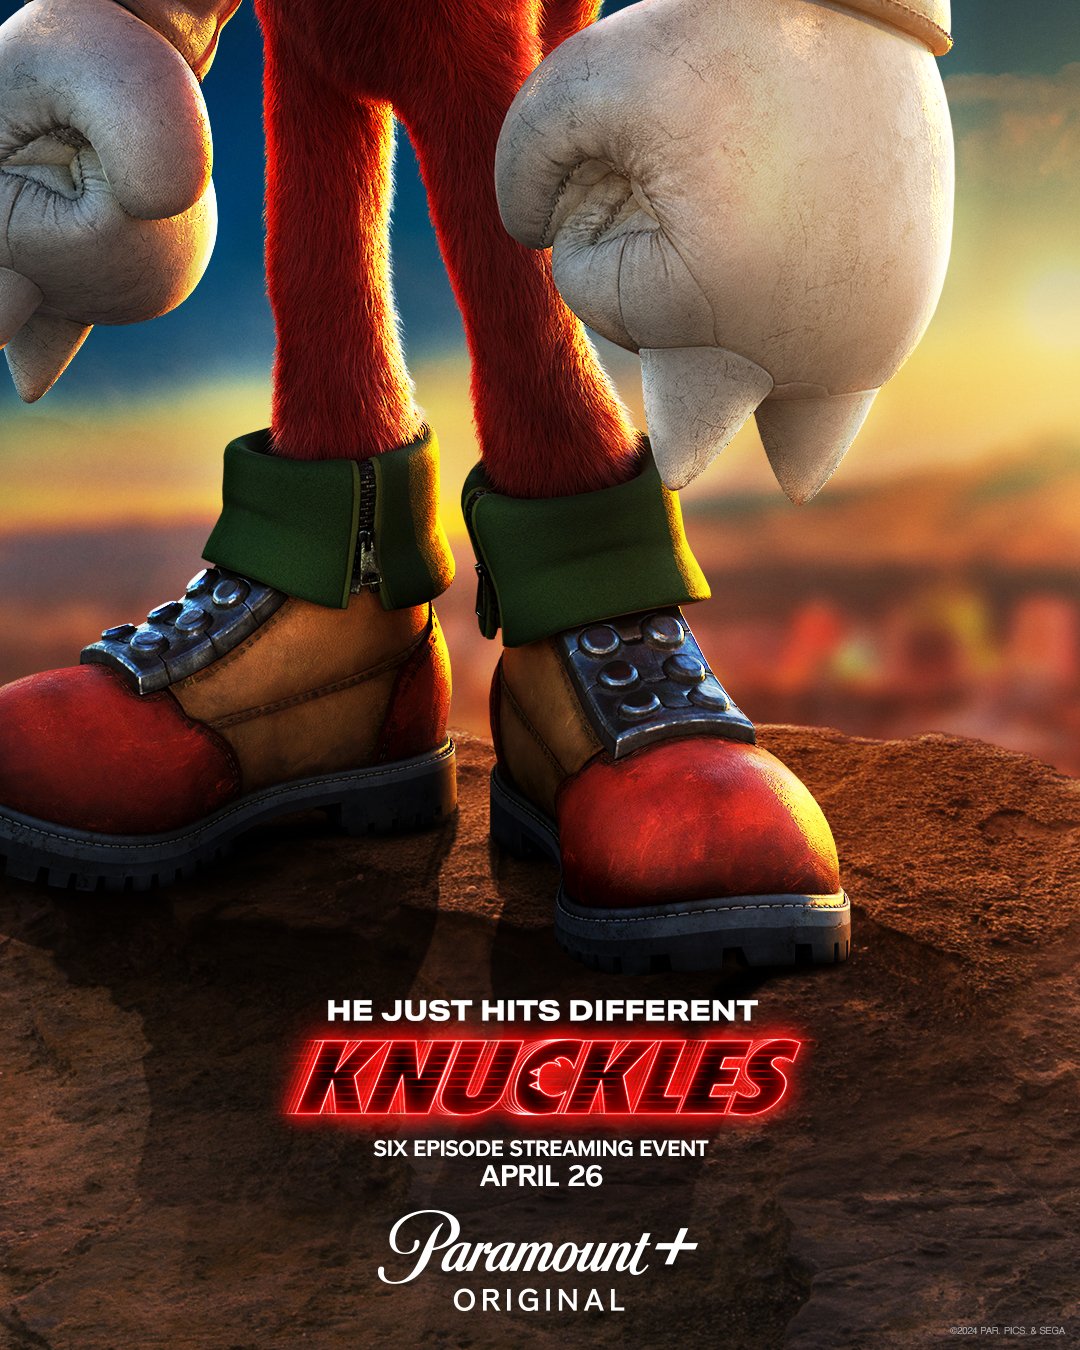 Sonic the Hedgehog, Knuckles